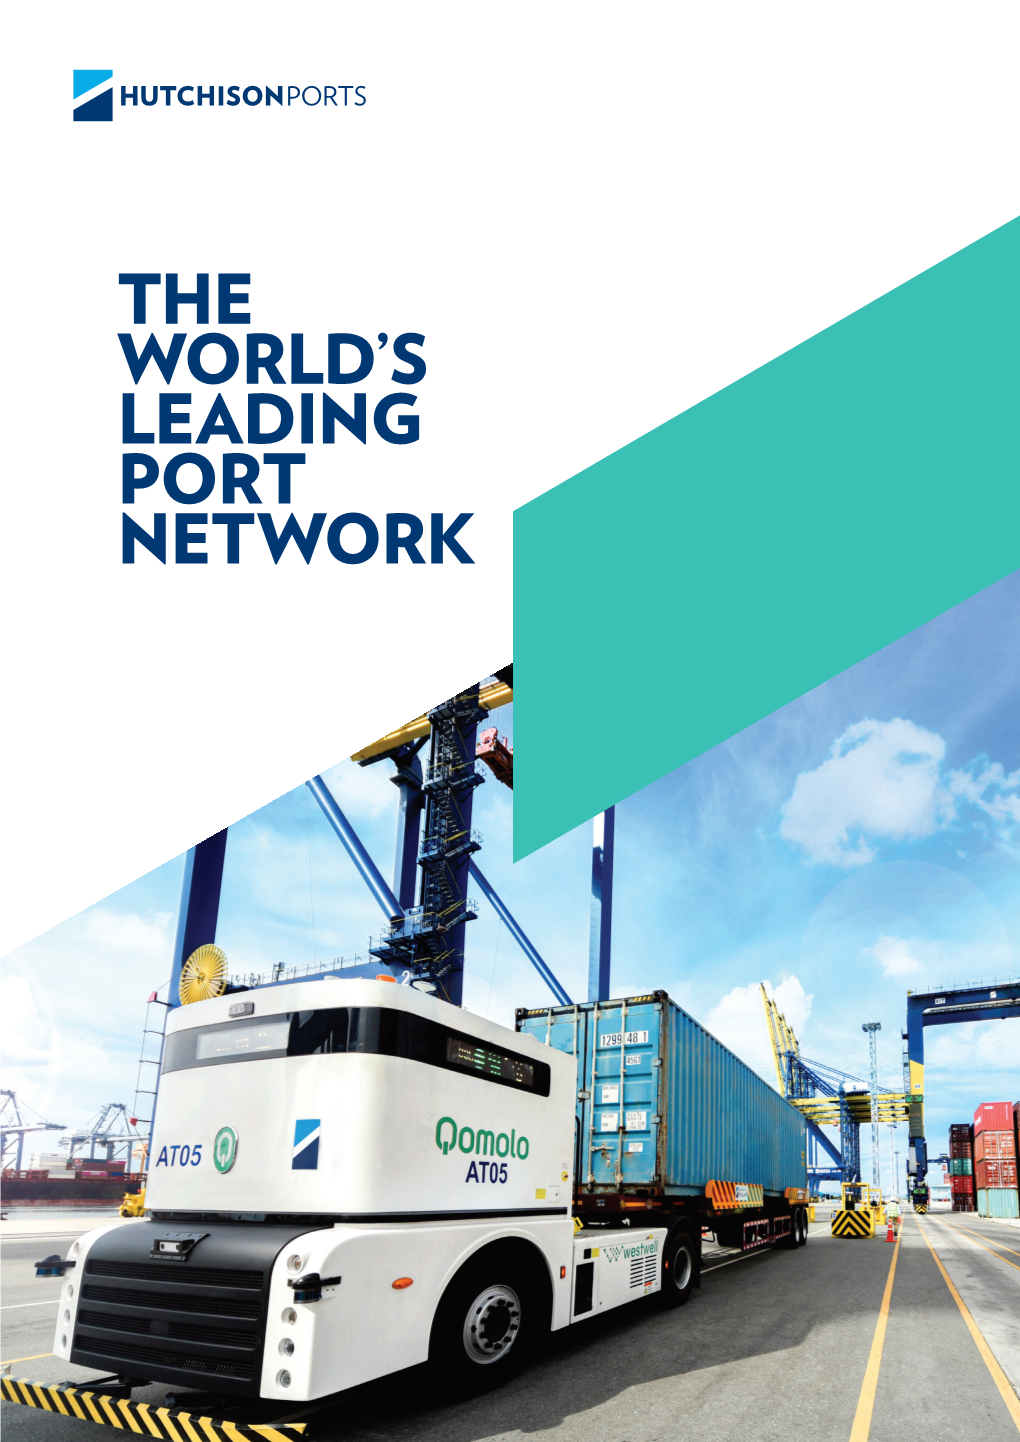 The World's Leading Port Network